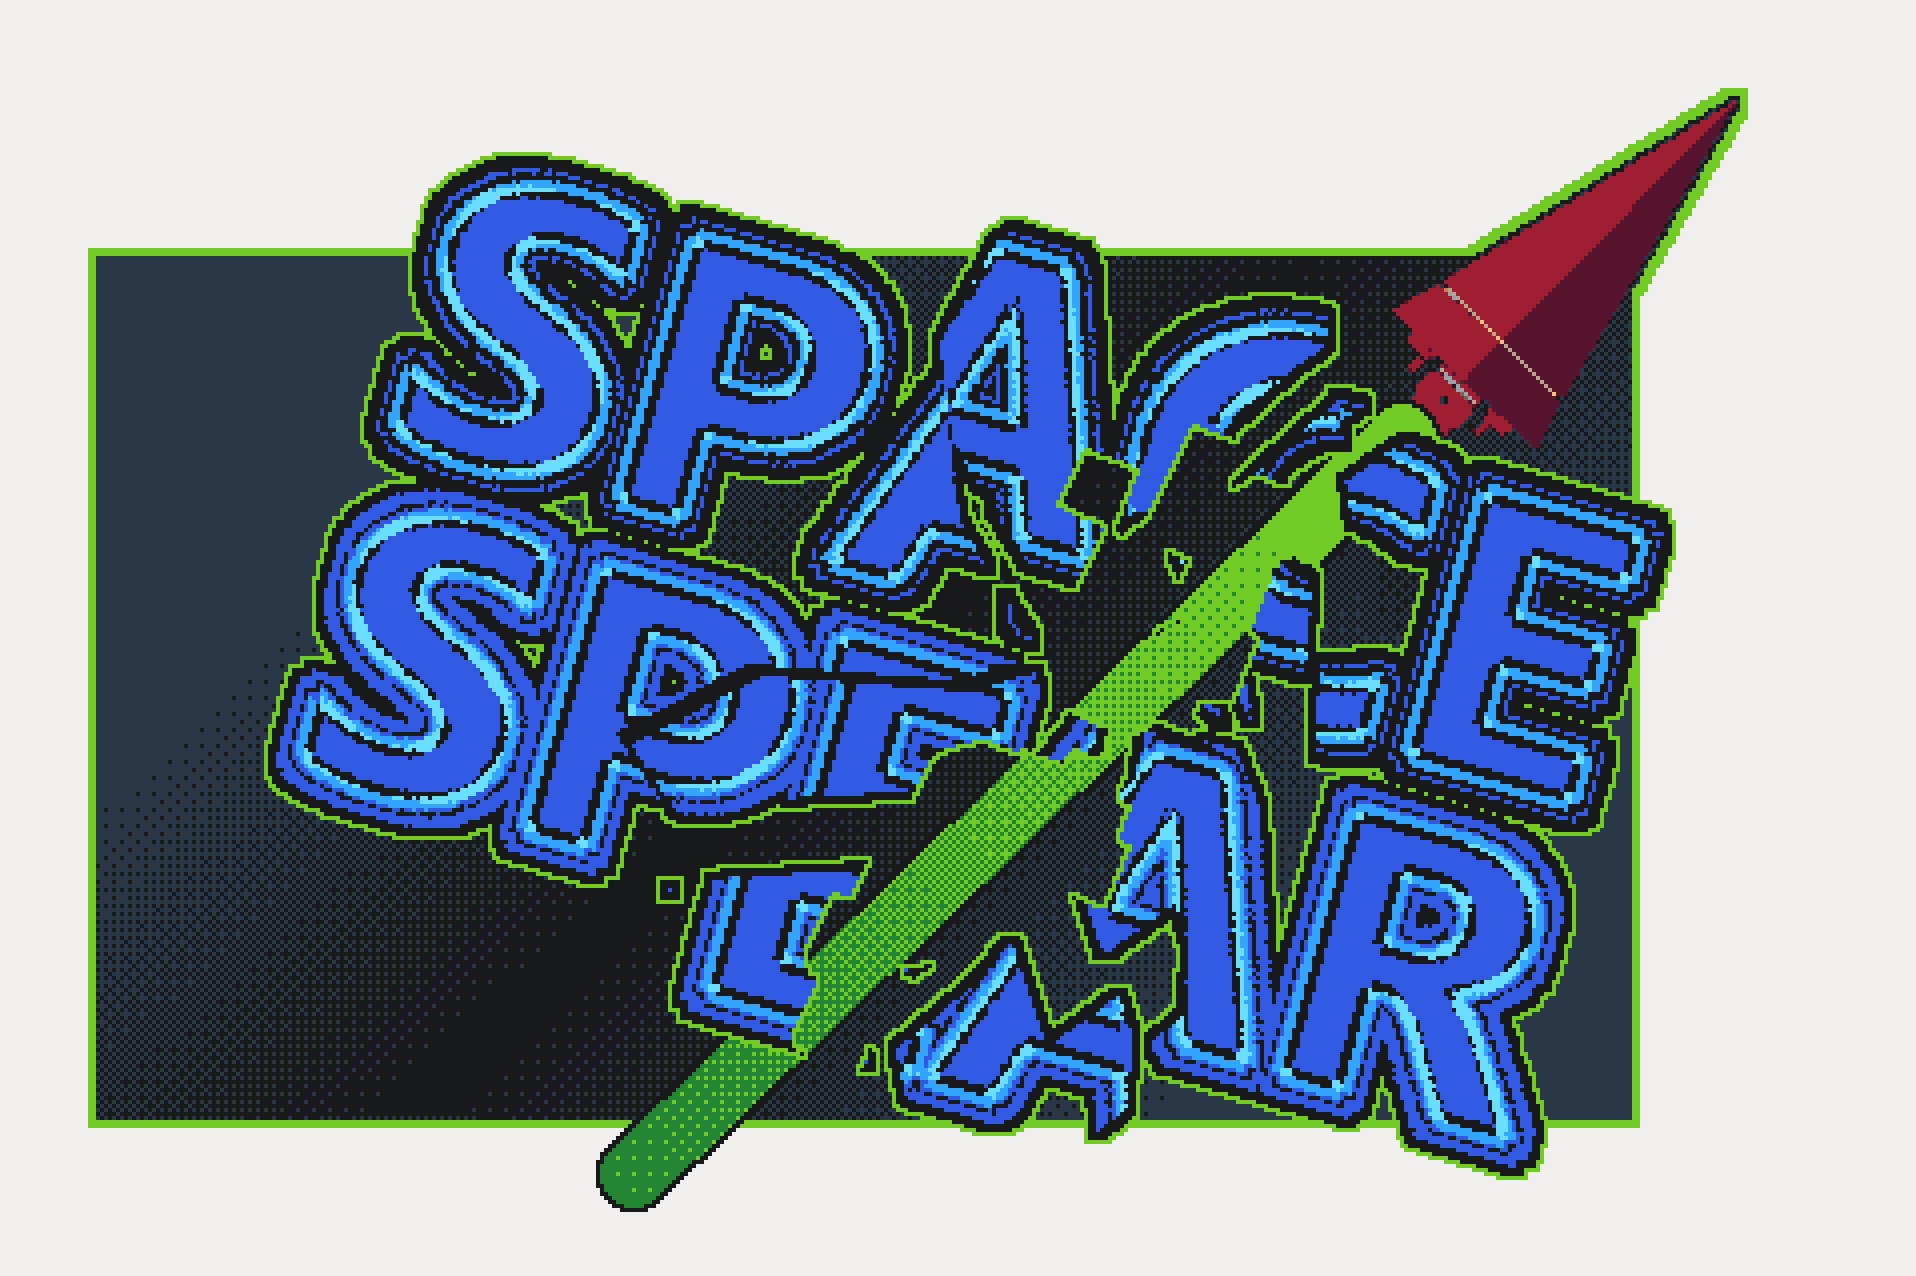 Space spear